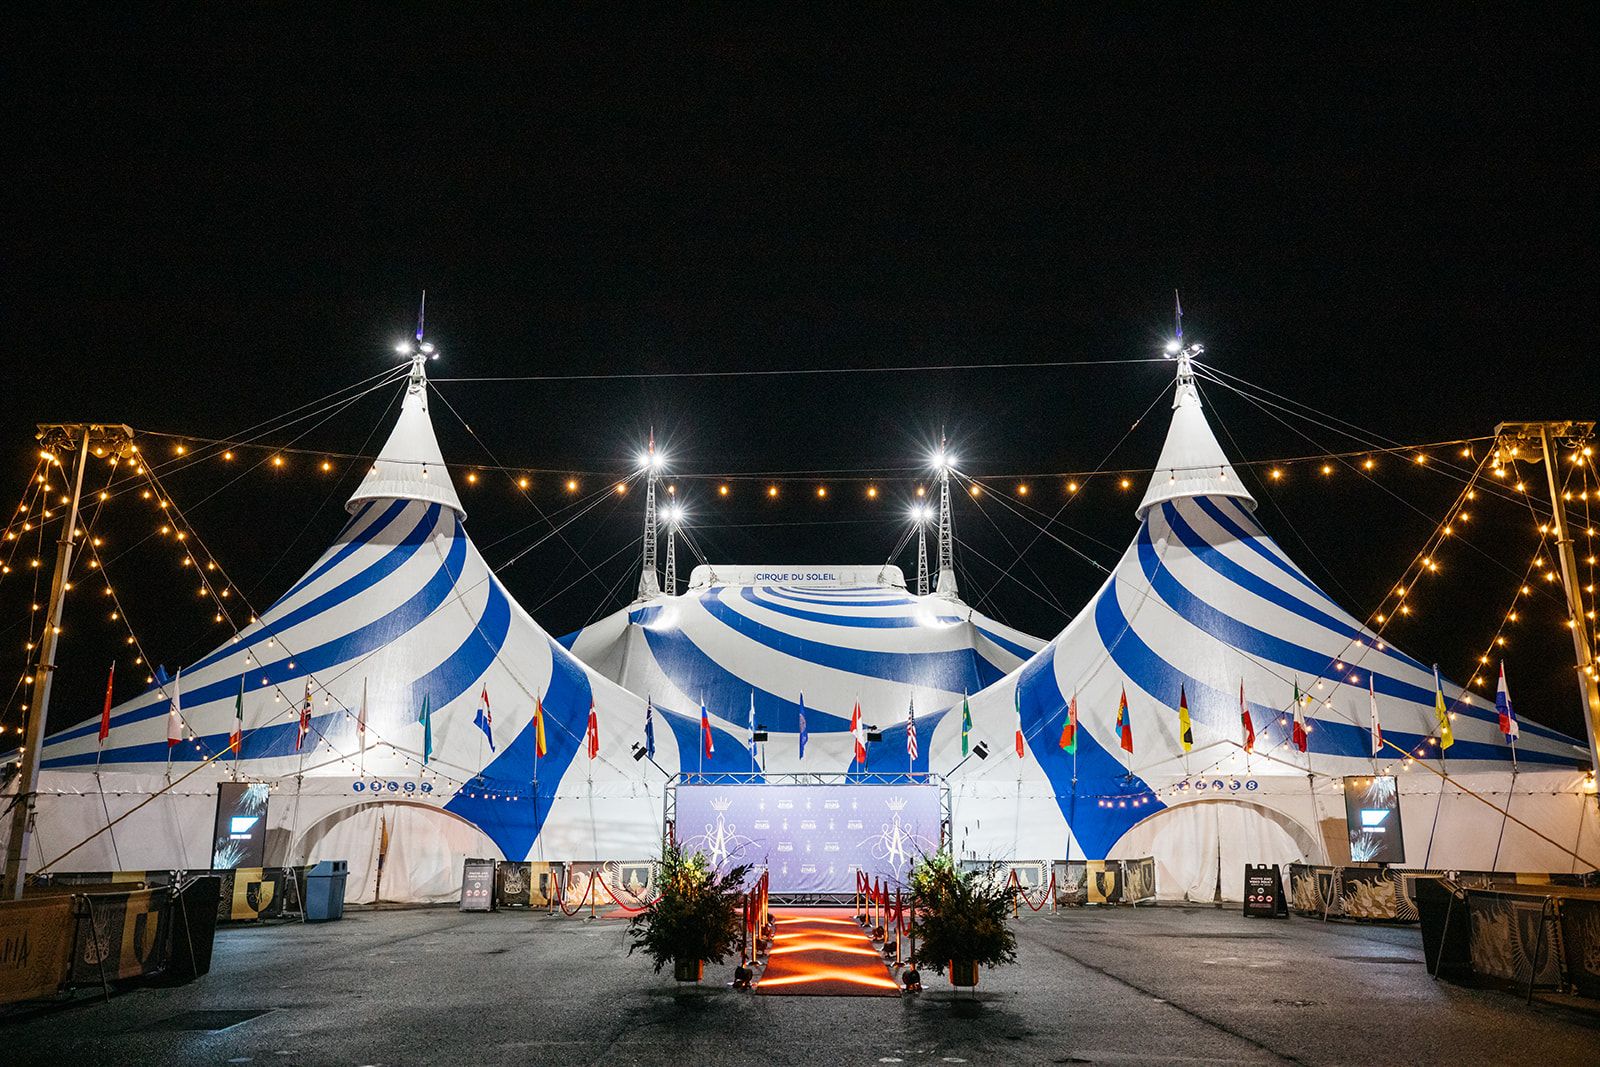 Immersive Cirque du Soleil Tycoon Experience is Now Officially